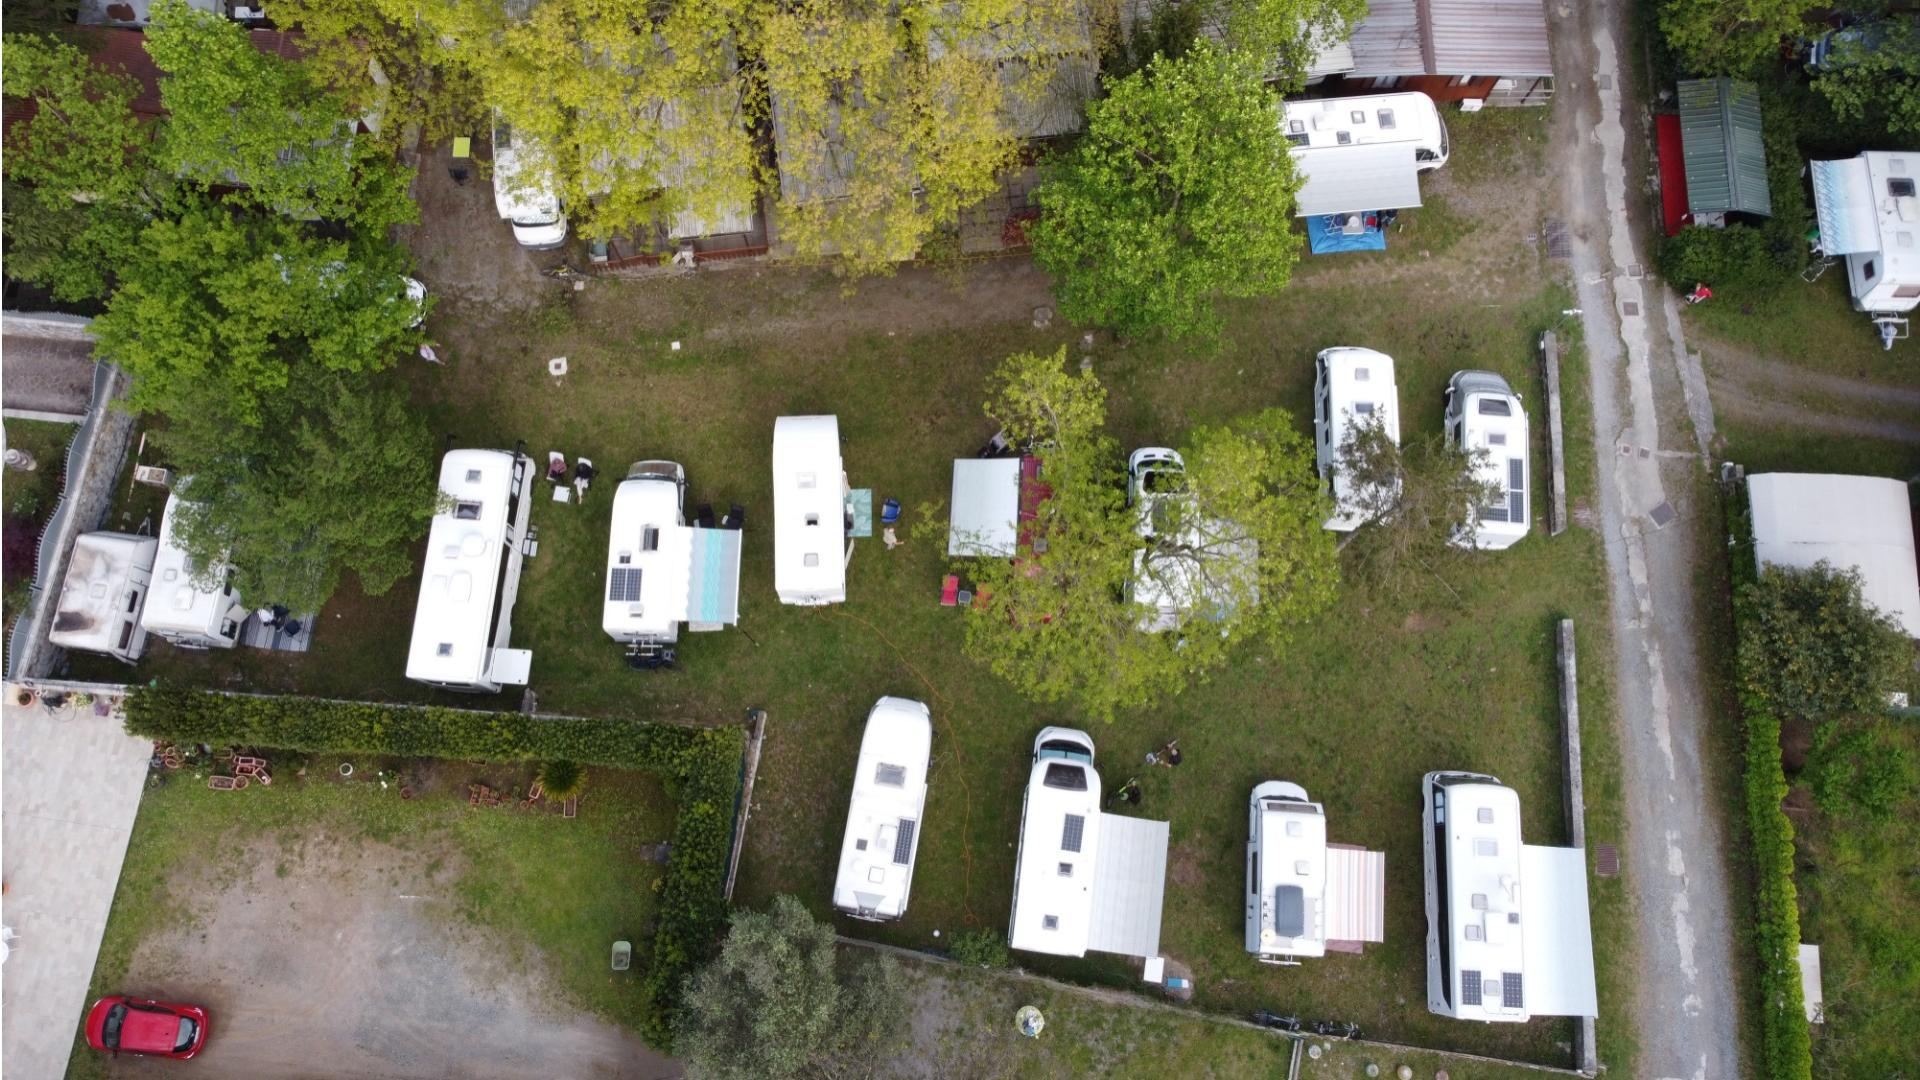 Aerial view of RVs parked in a green campsite with trees.